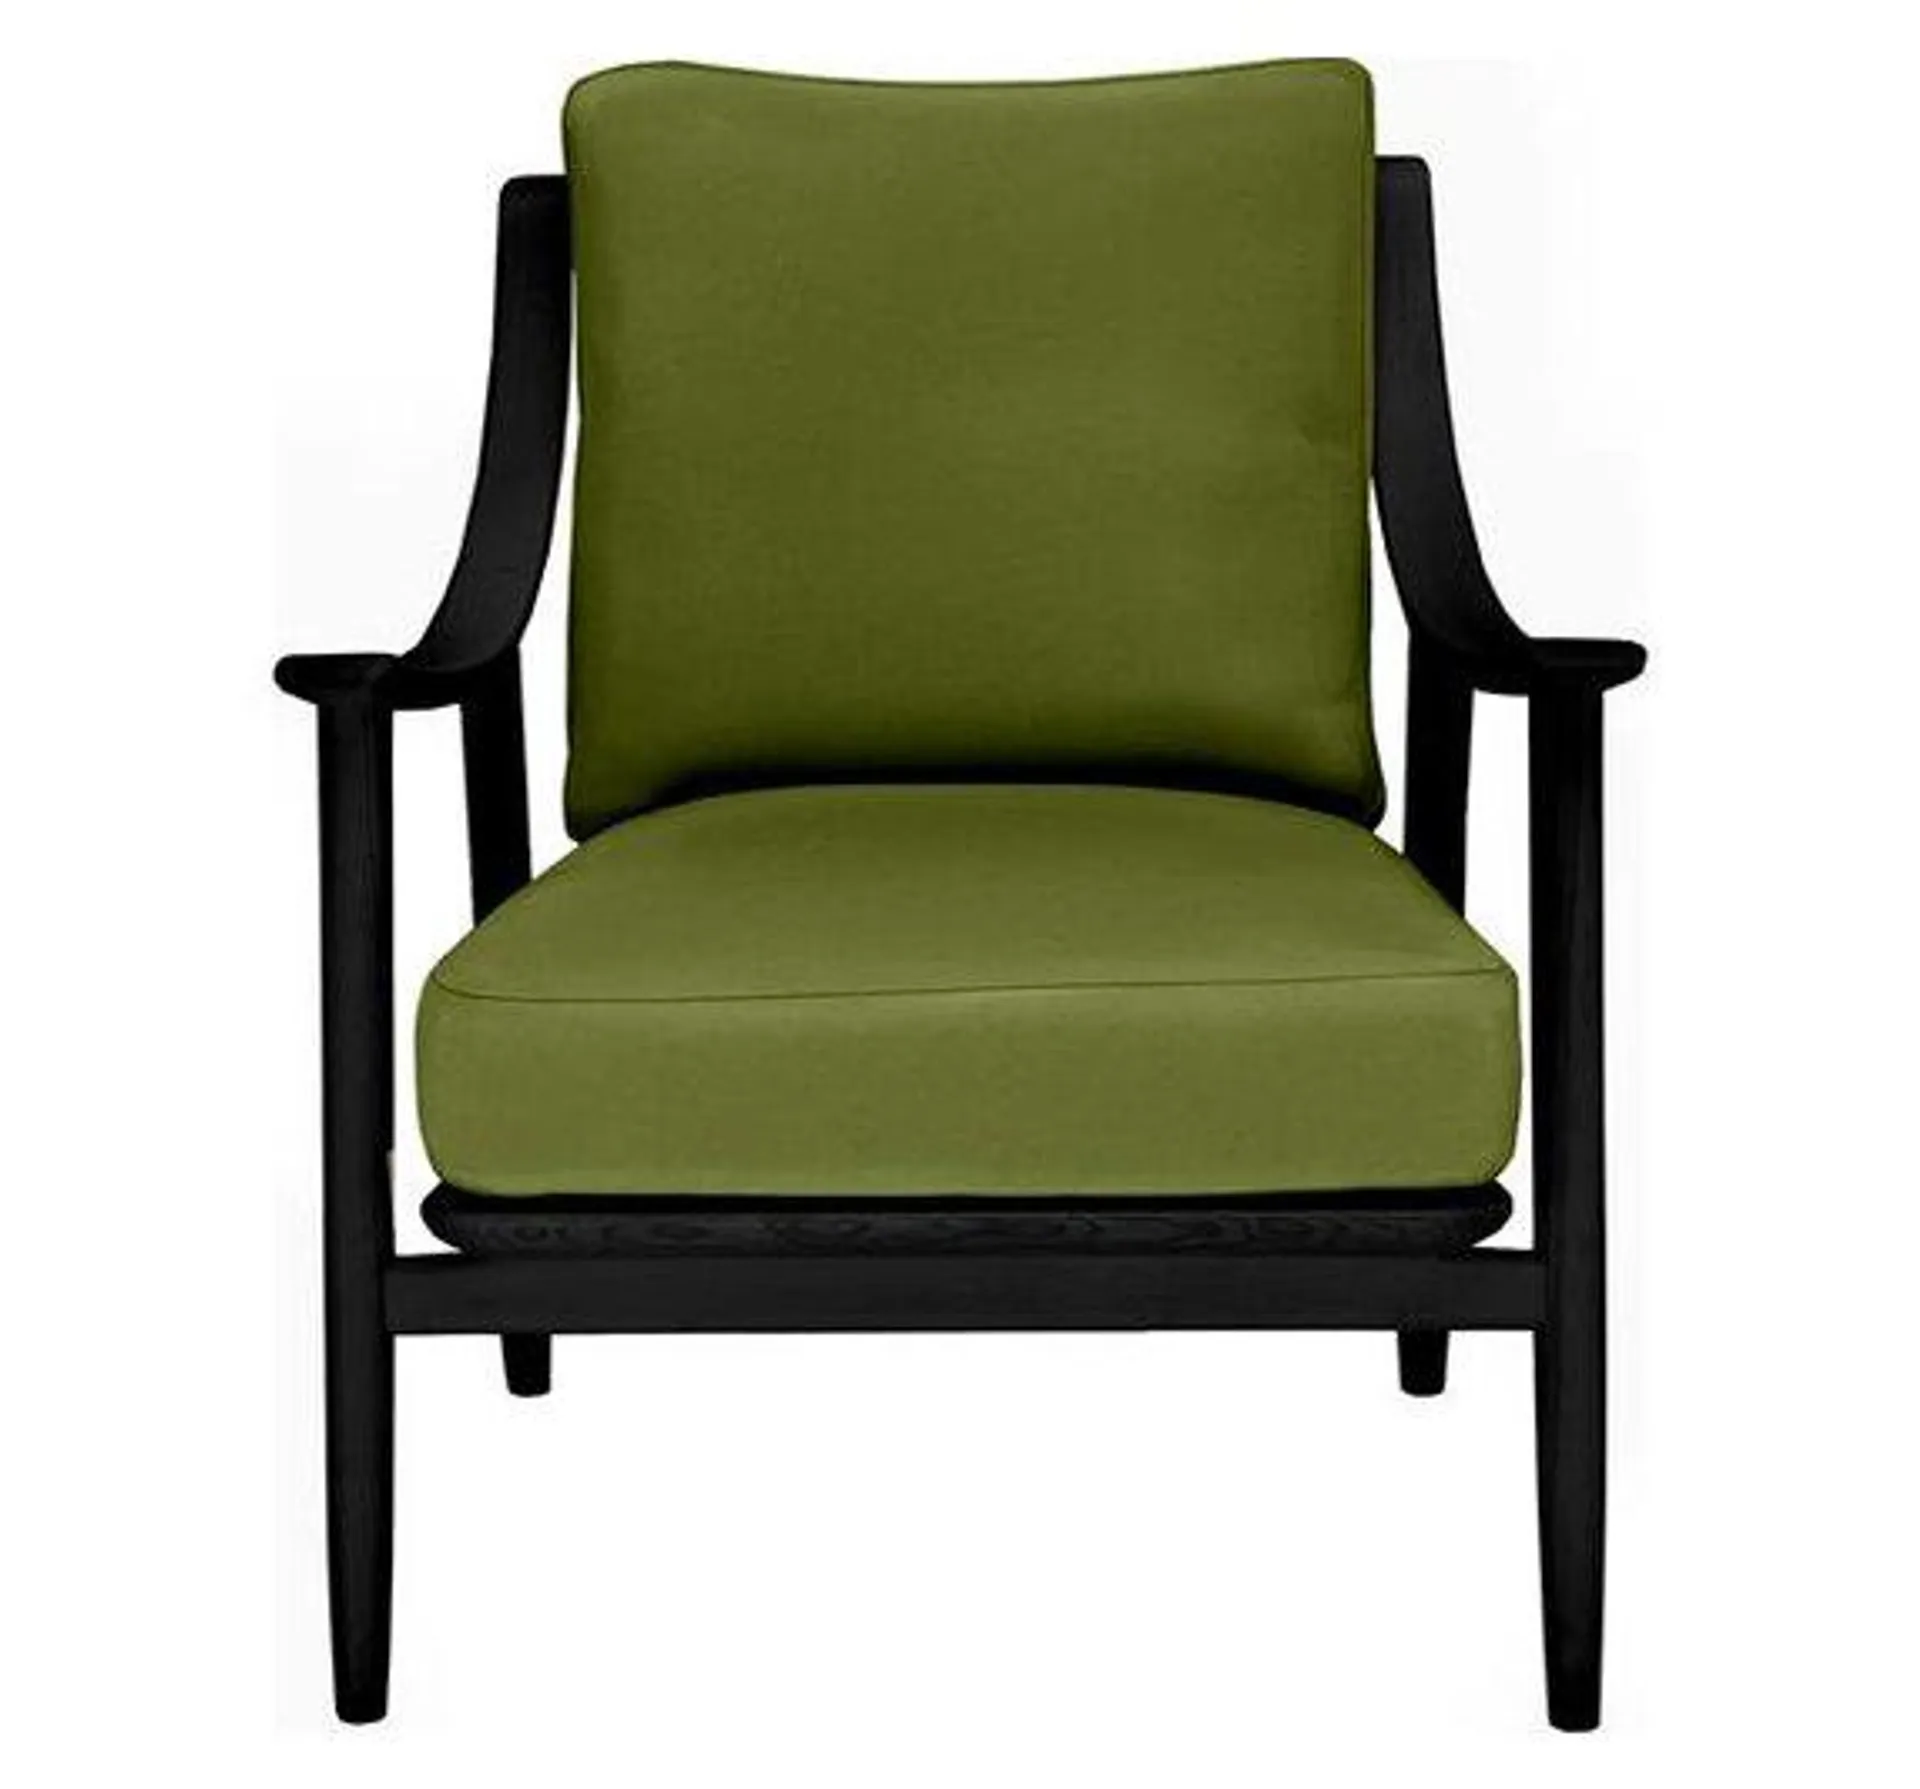 Chair in Black & C730 Green